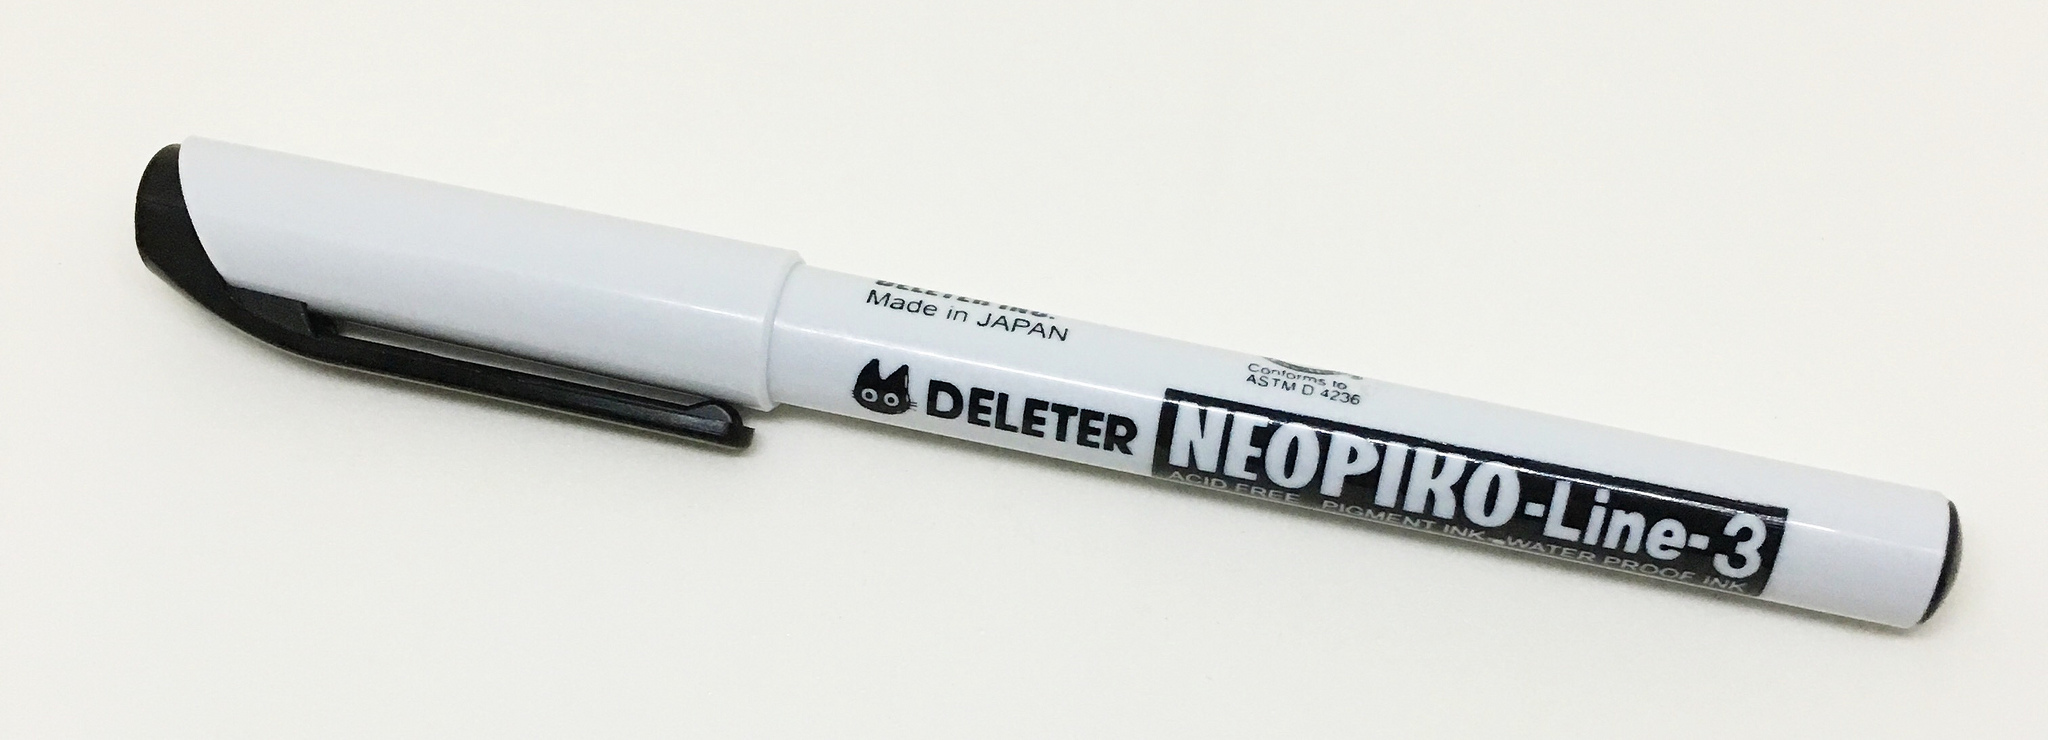 Deleter Neopiko Line 3 Drawing Pen Review — The Pen Addict